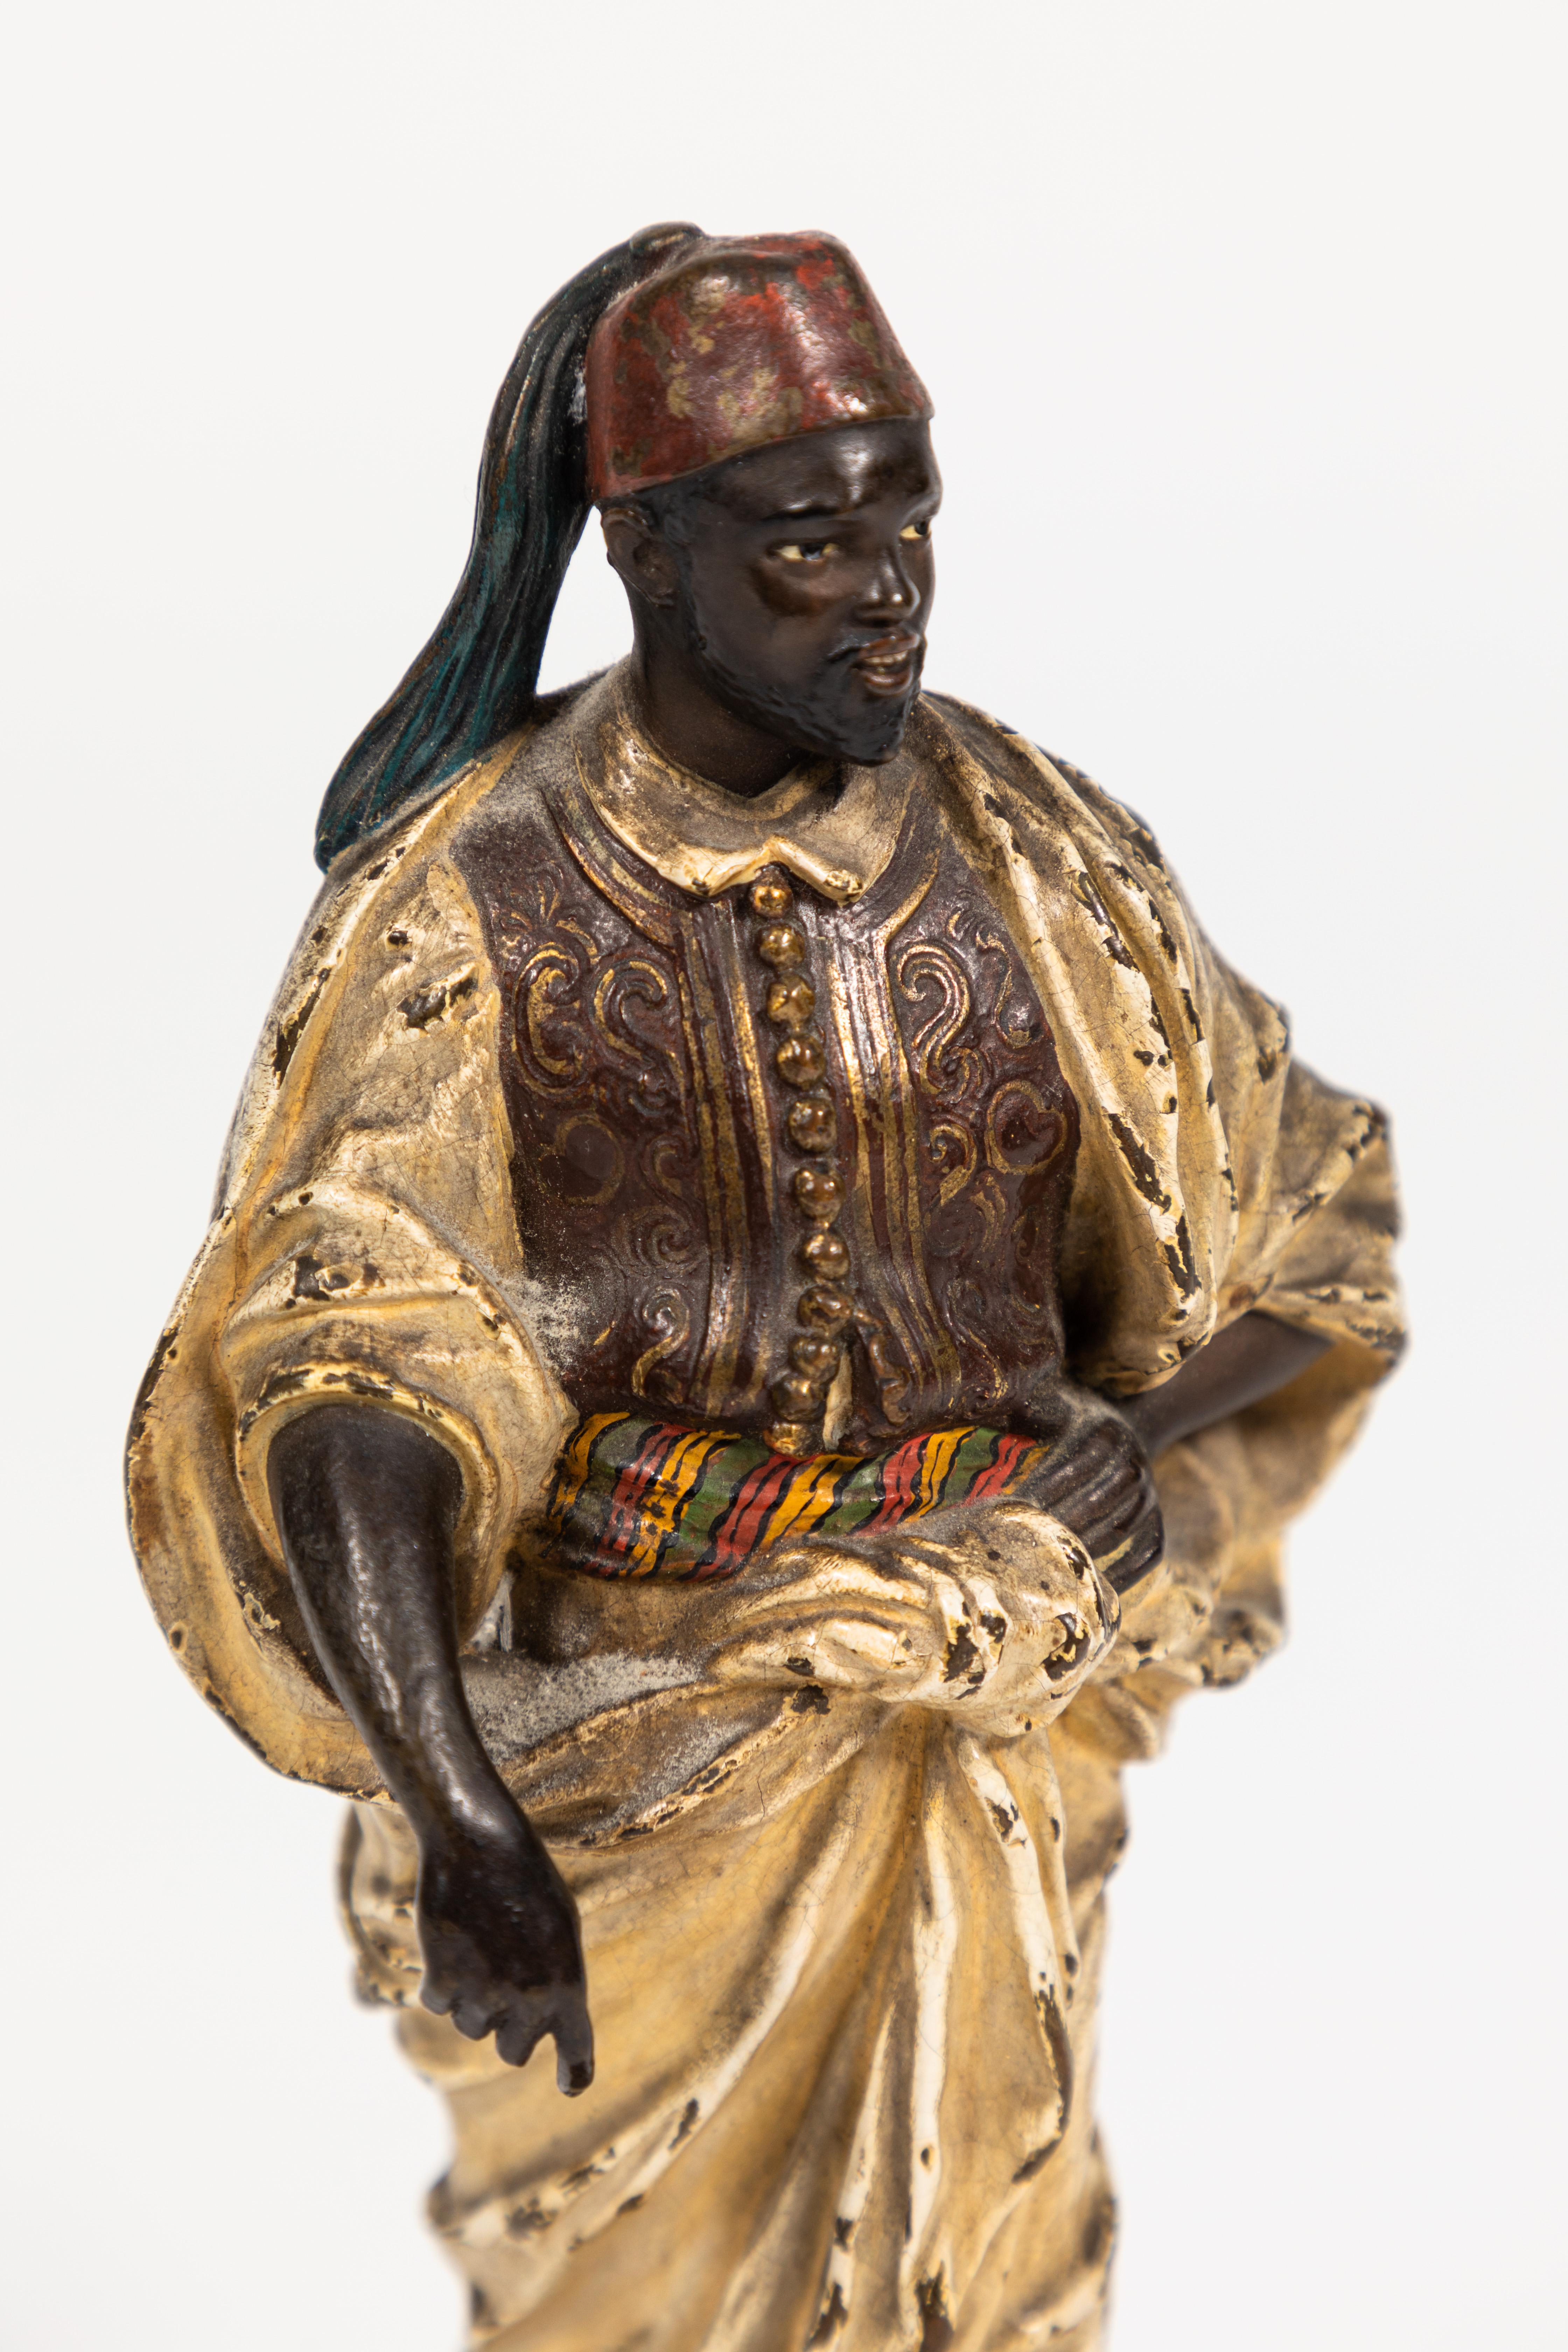 Aesthetic Movement 1900s Cold-Painted Statue of Arab For Sale